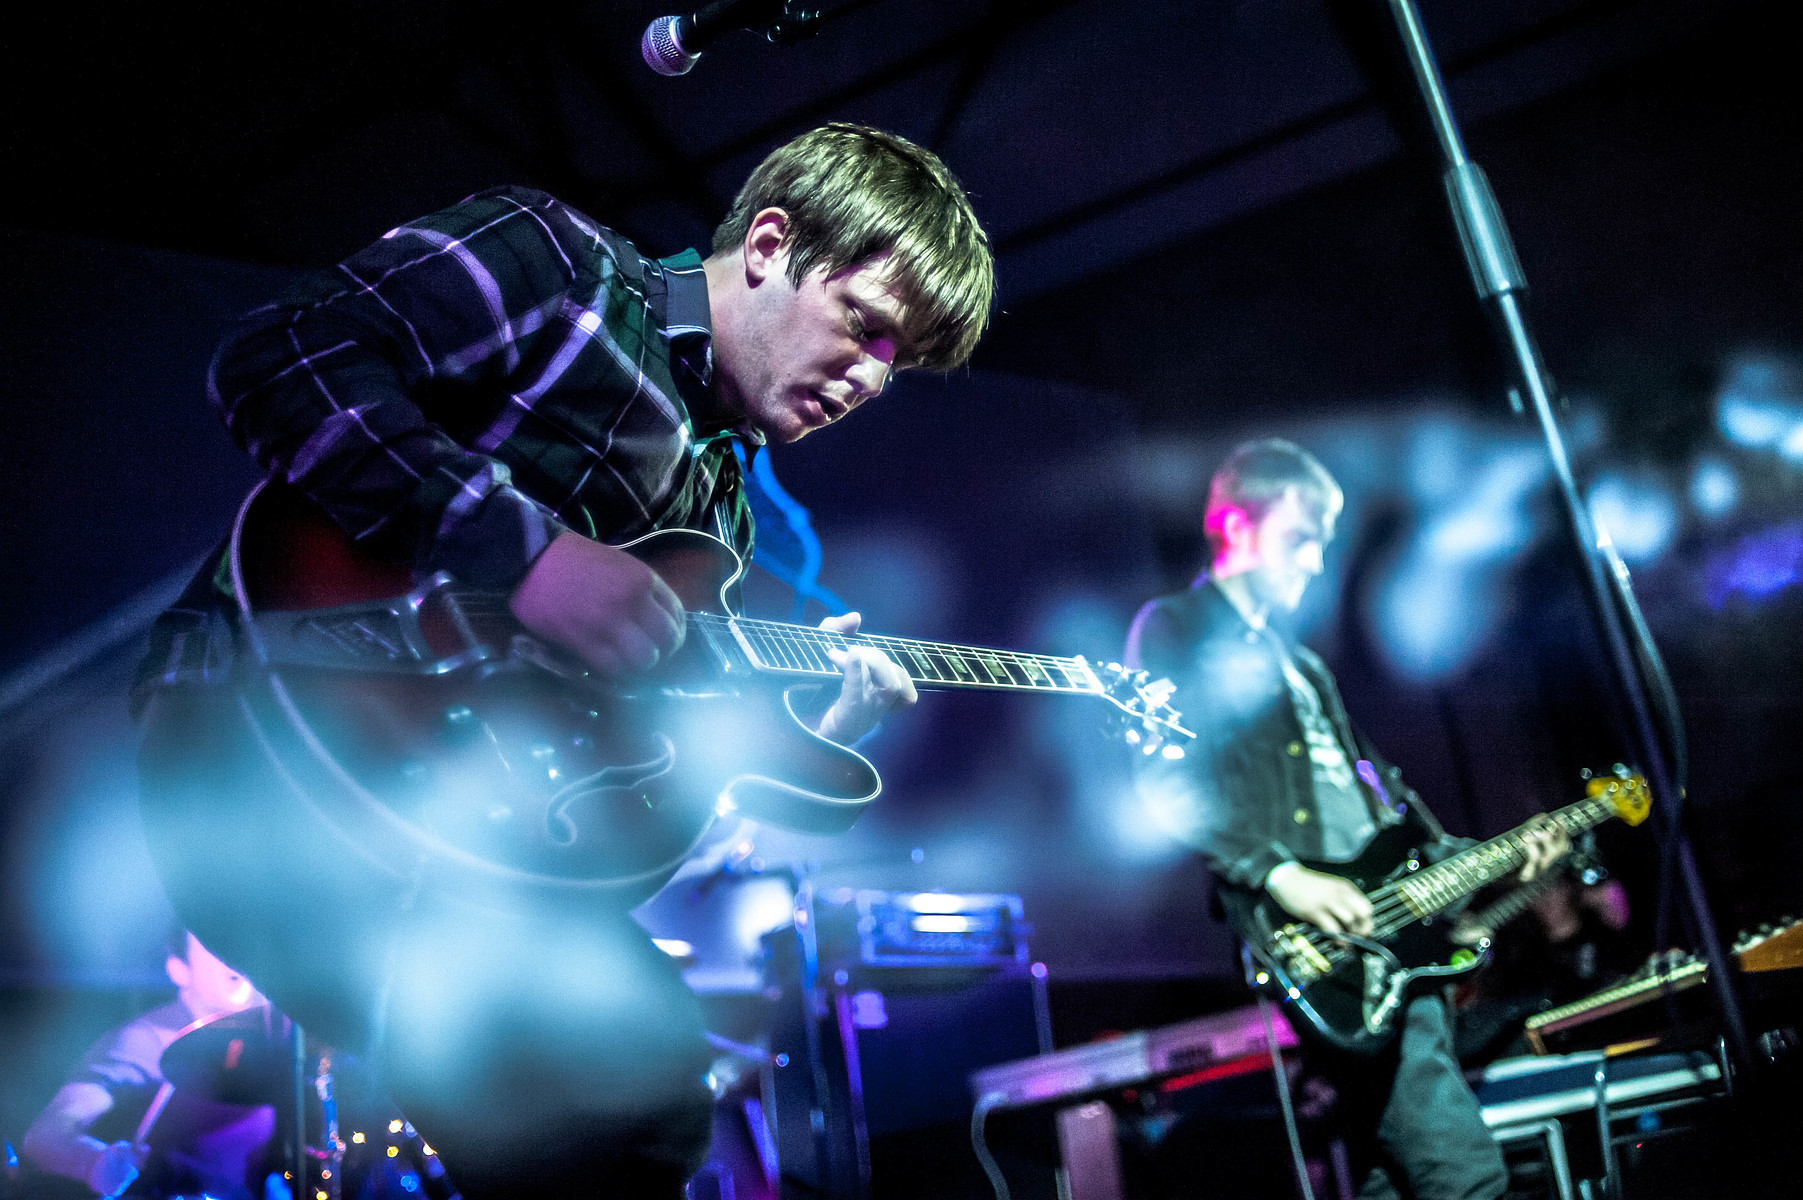 The Lucid Dream @Liverpool Psych Fest 2014